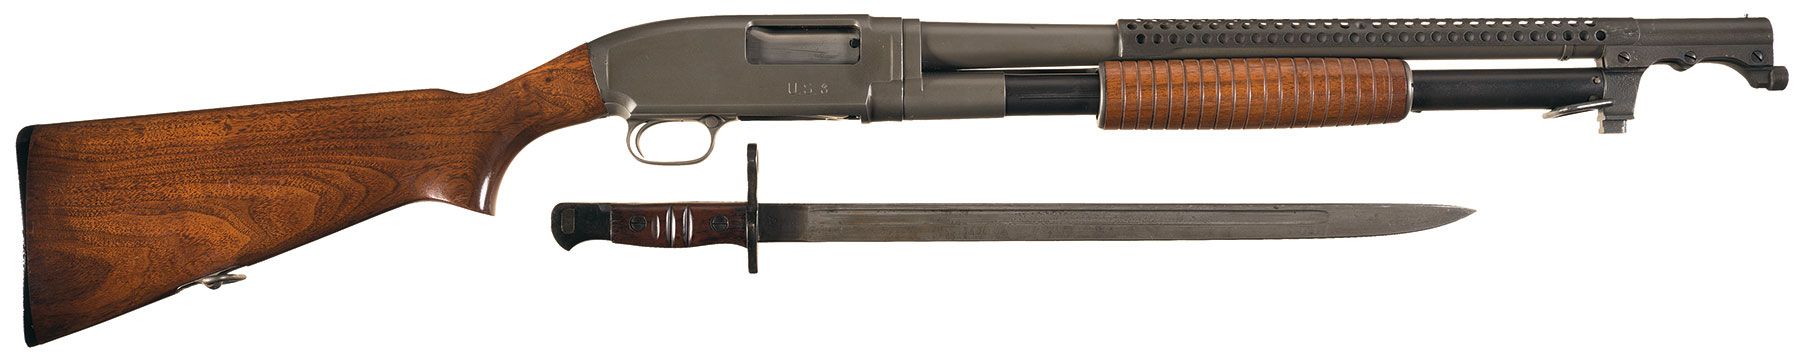 U.S. Marked Winchester Model 12 Trench Style Slide Action Shotgun with Bayo...